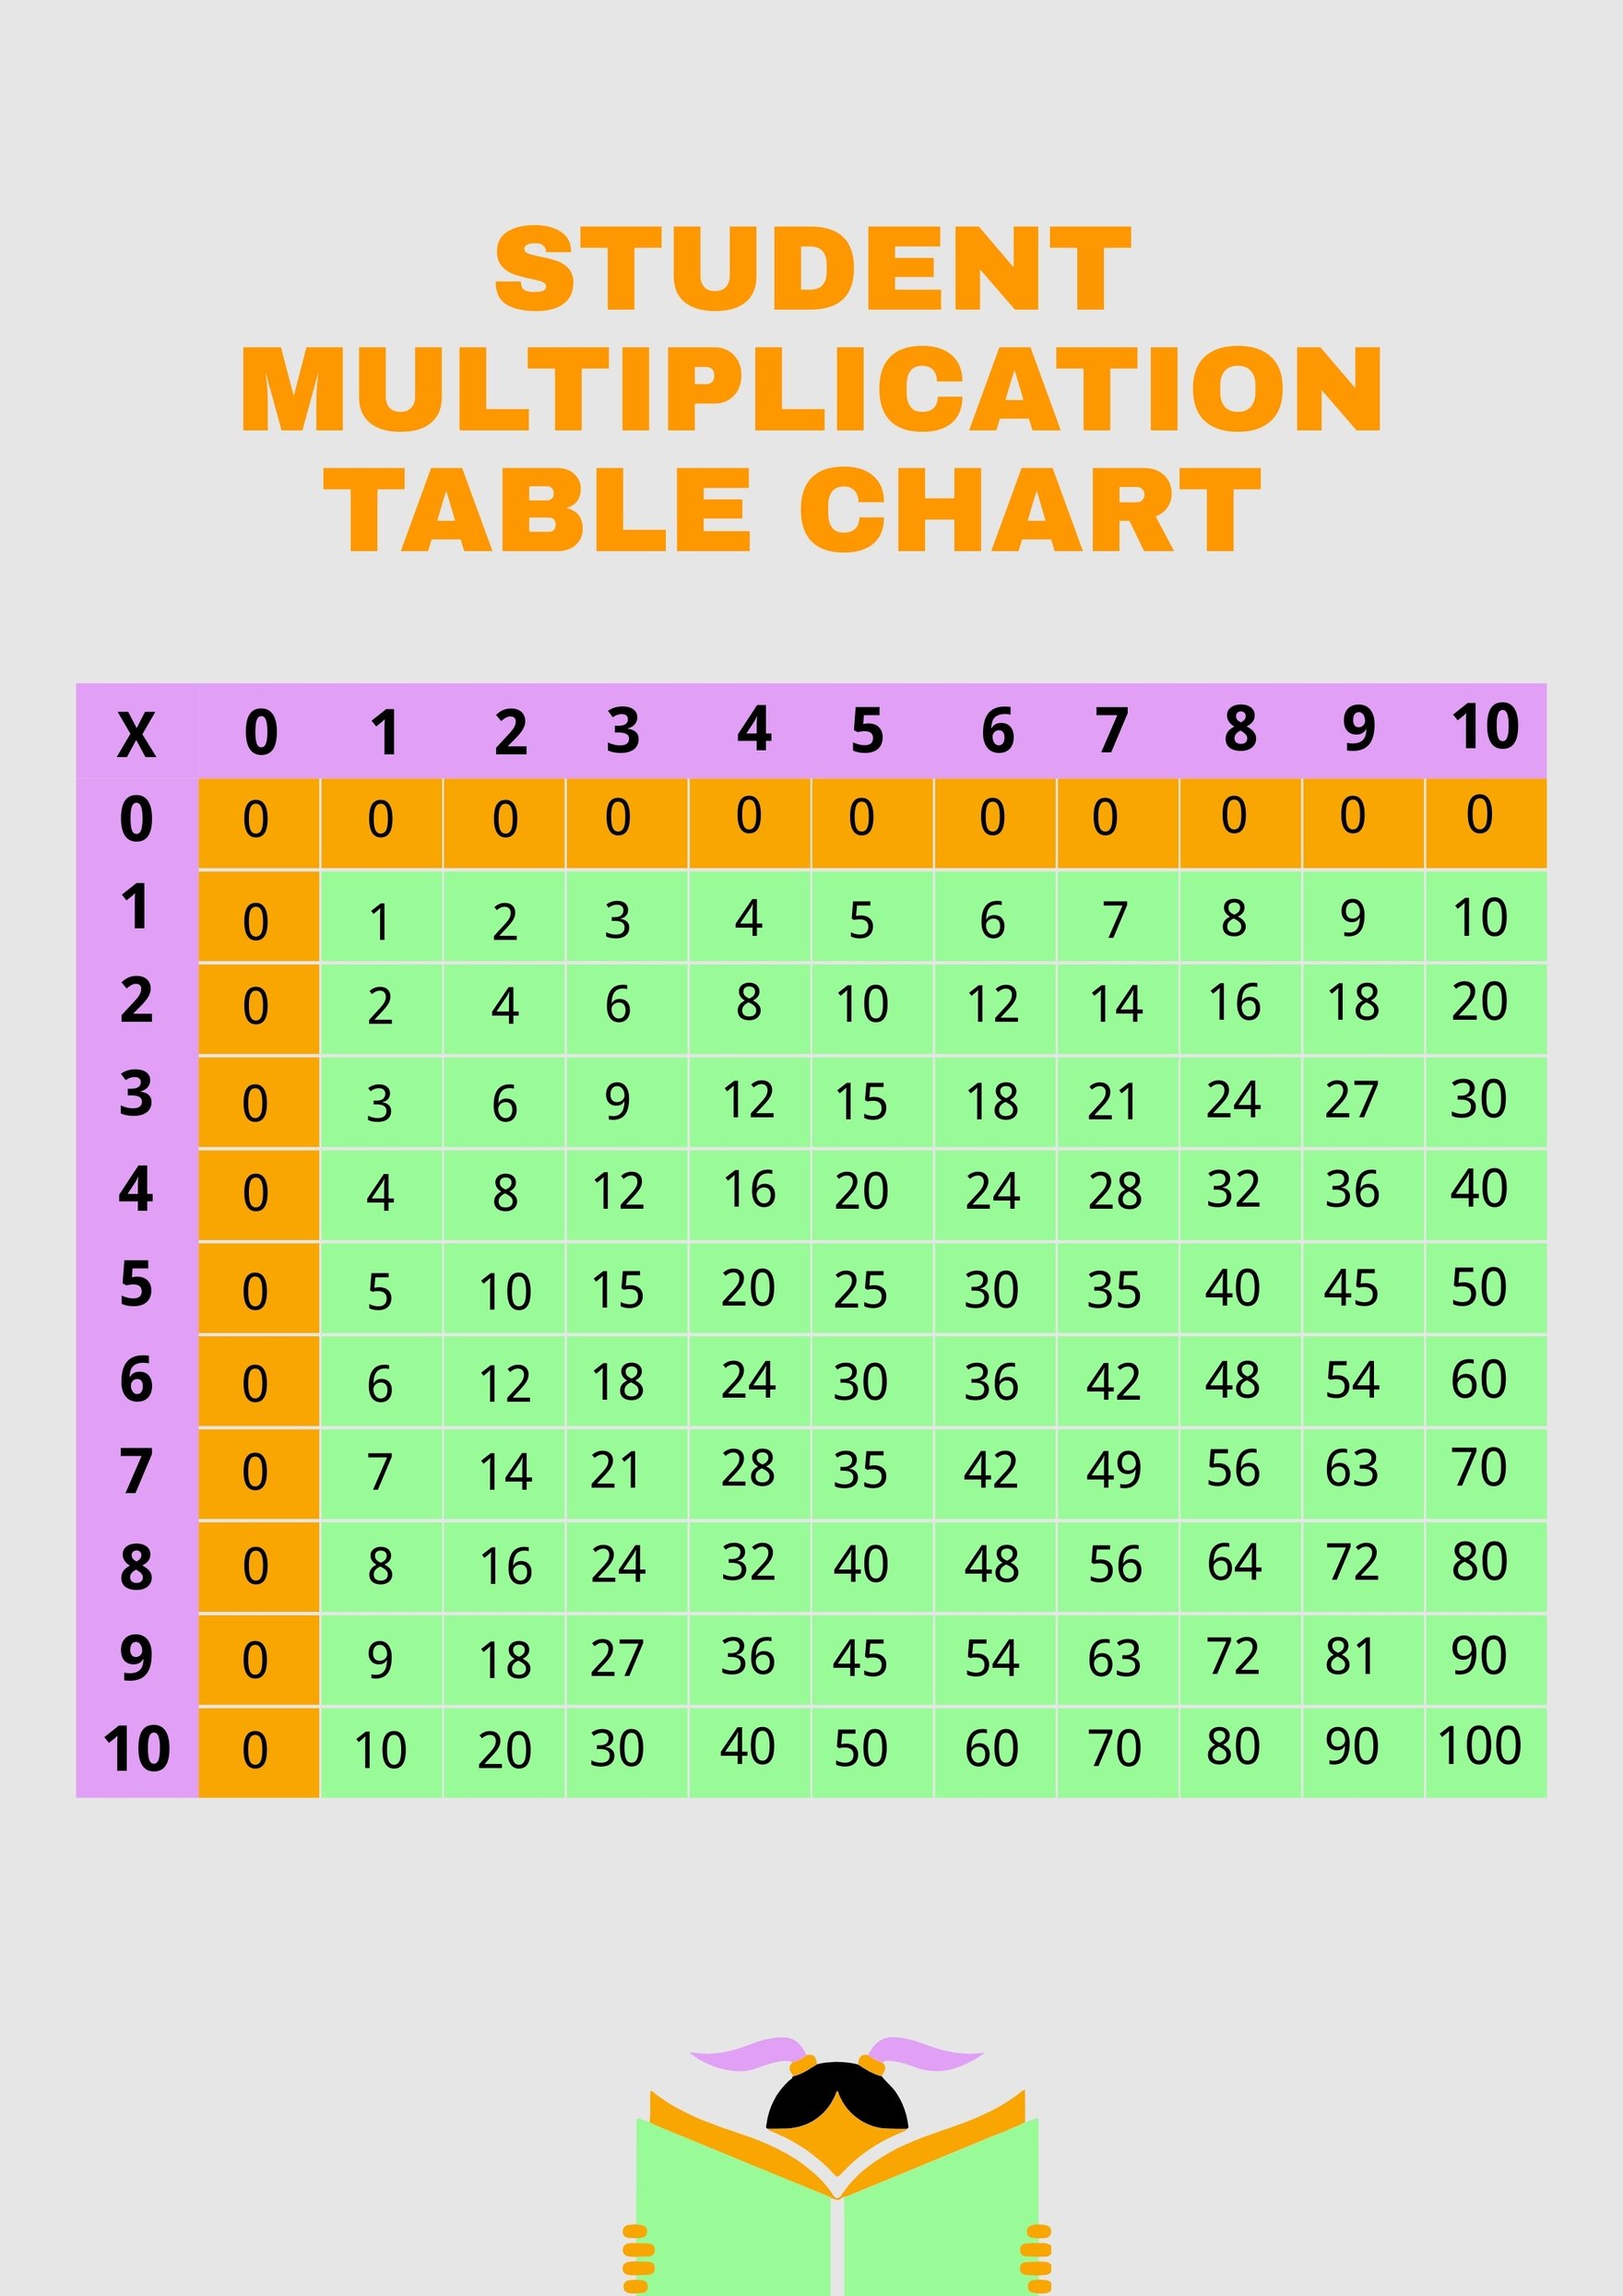 Multiplication Table Chart Template for Student in PDF, Illustrator